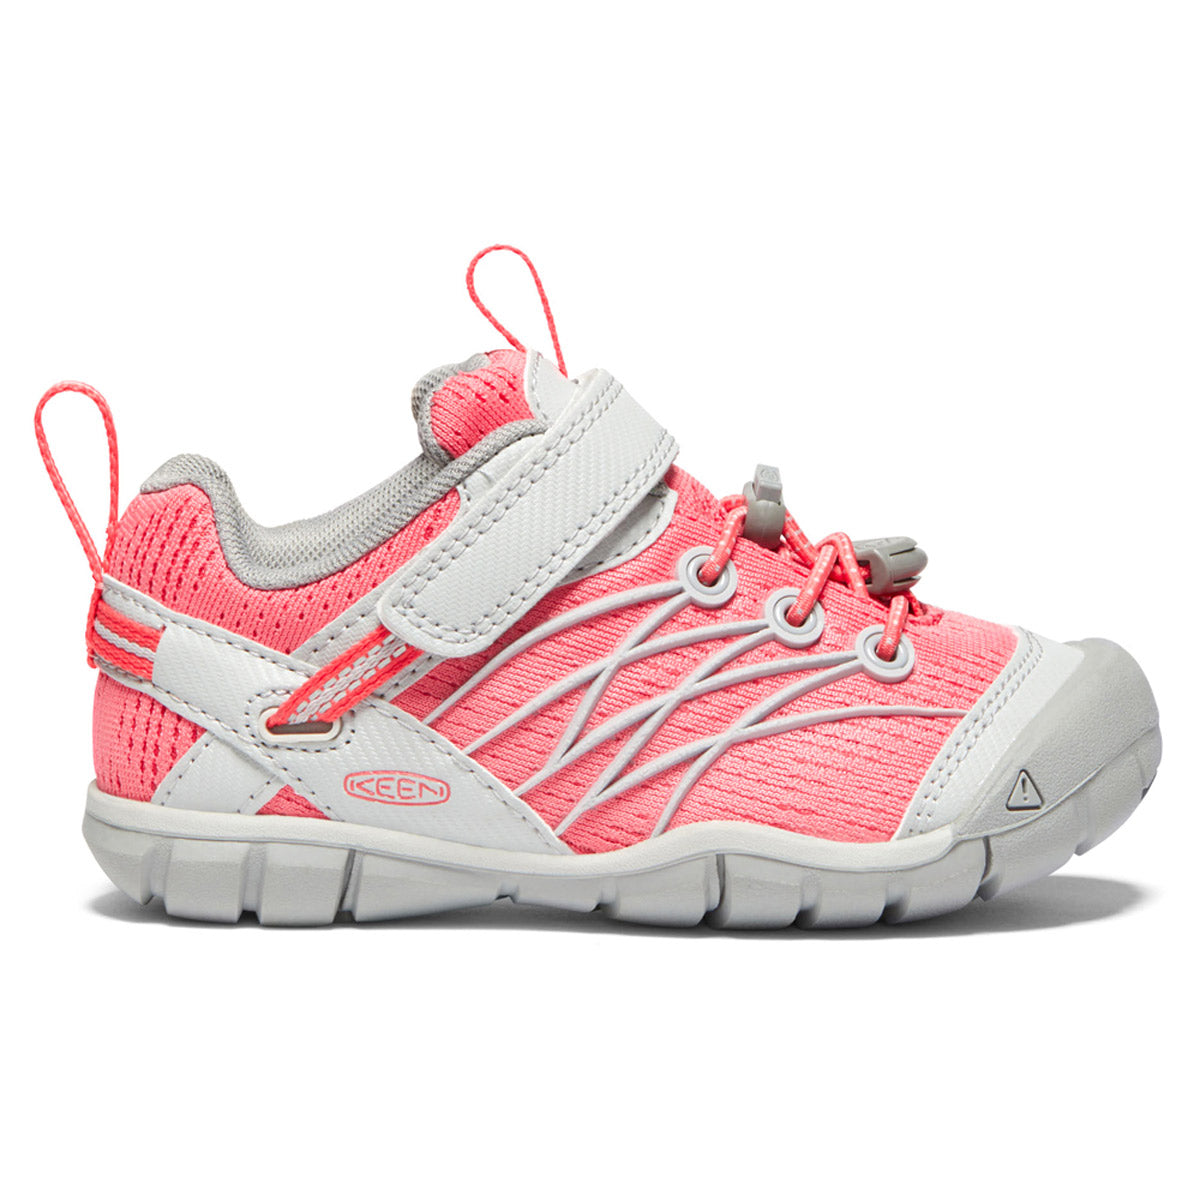 A single pink and gray Keen Chandler CNX Child Drizzle/Dubarry sandal with elastic laces against a white background, designed as traction-enhanced kids shoes.